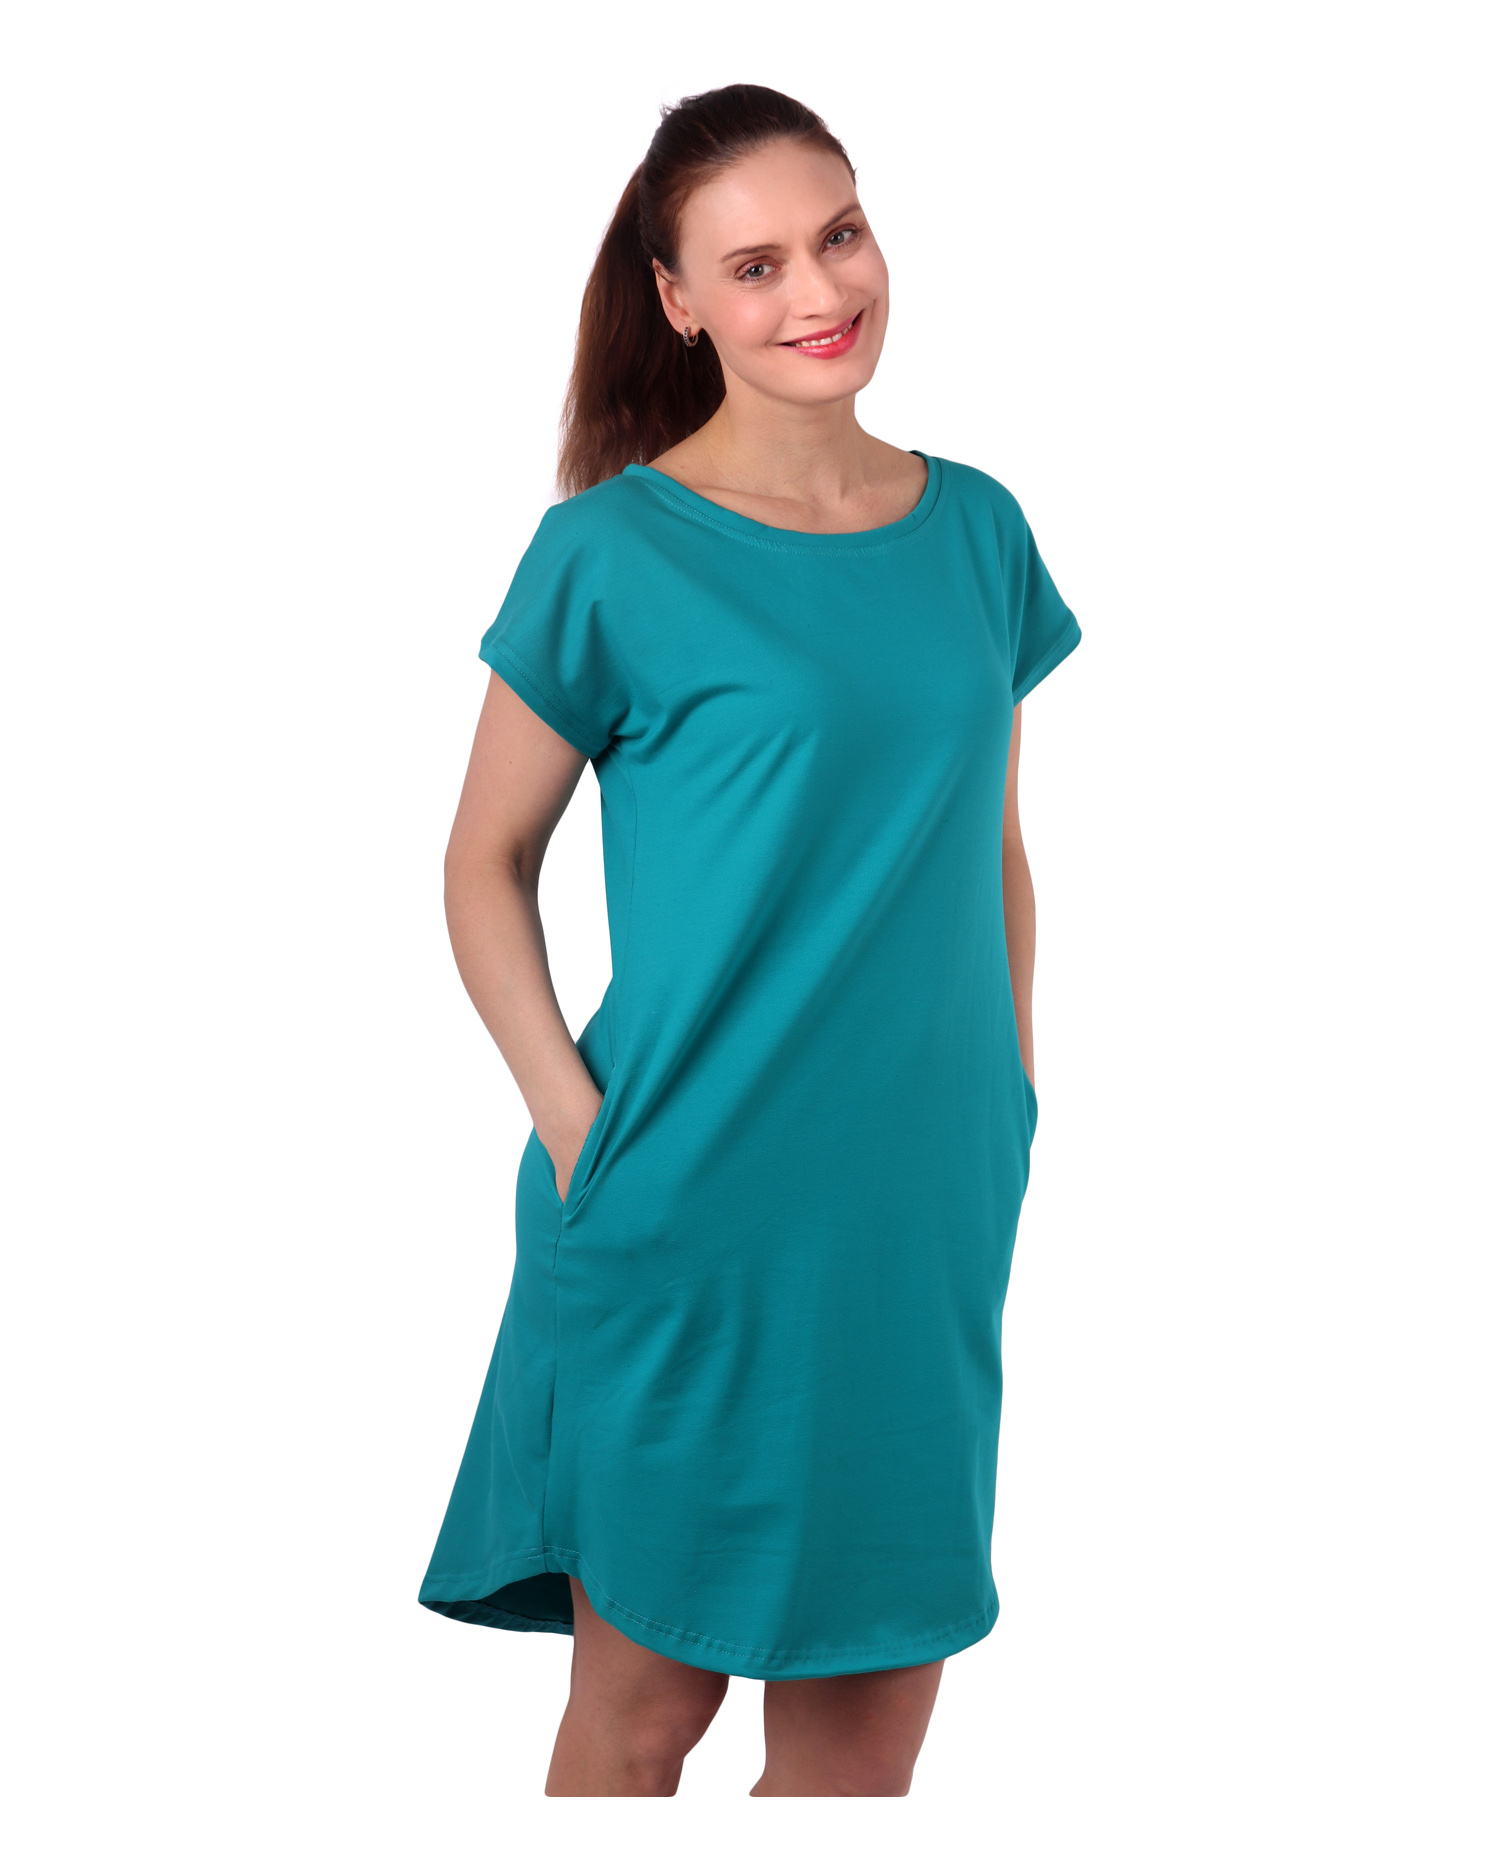 Women's dress with pockets Olivia, loose cut, turquoise